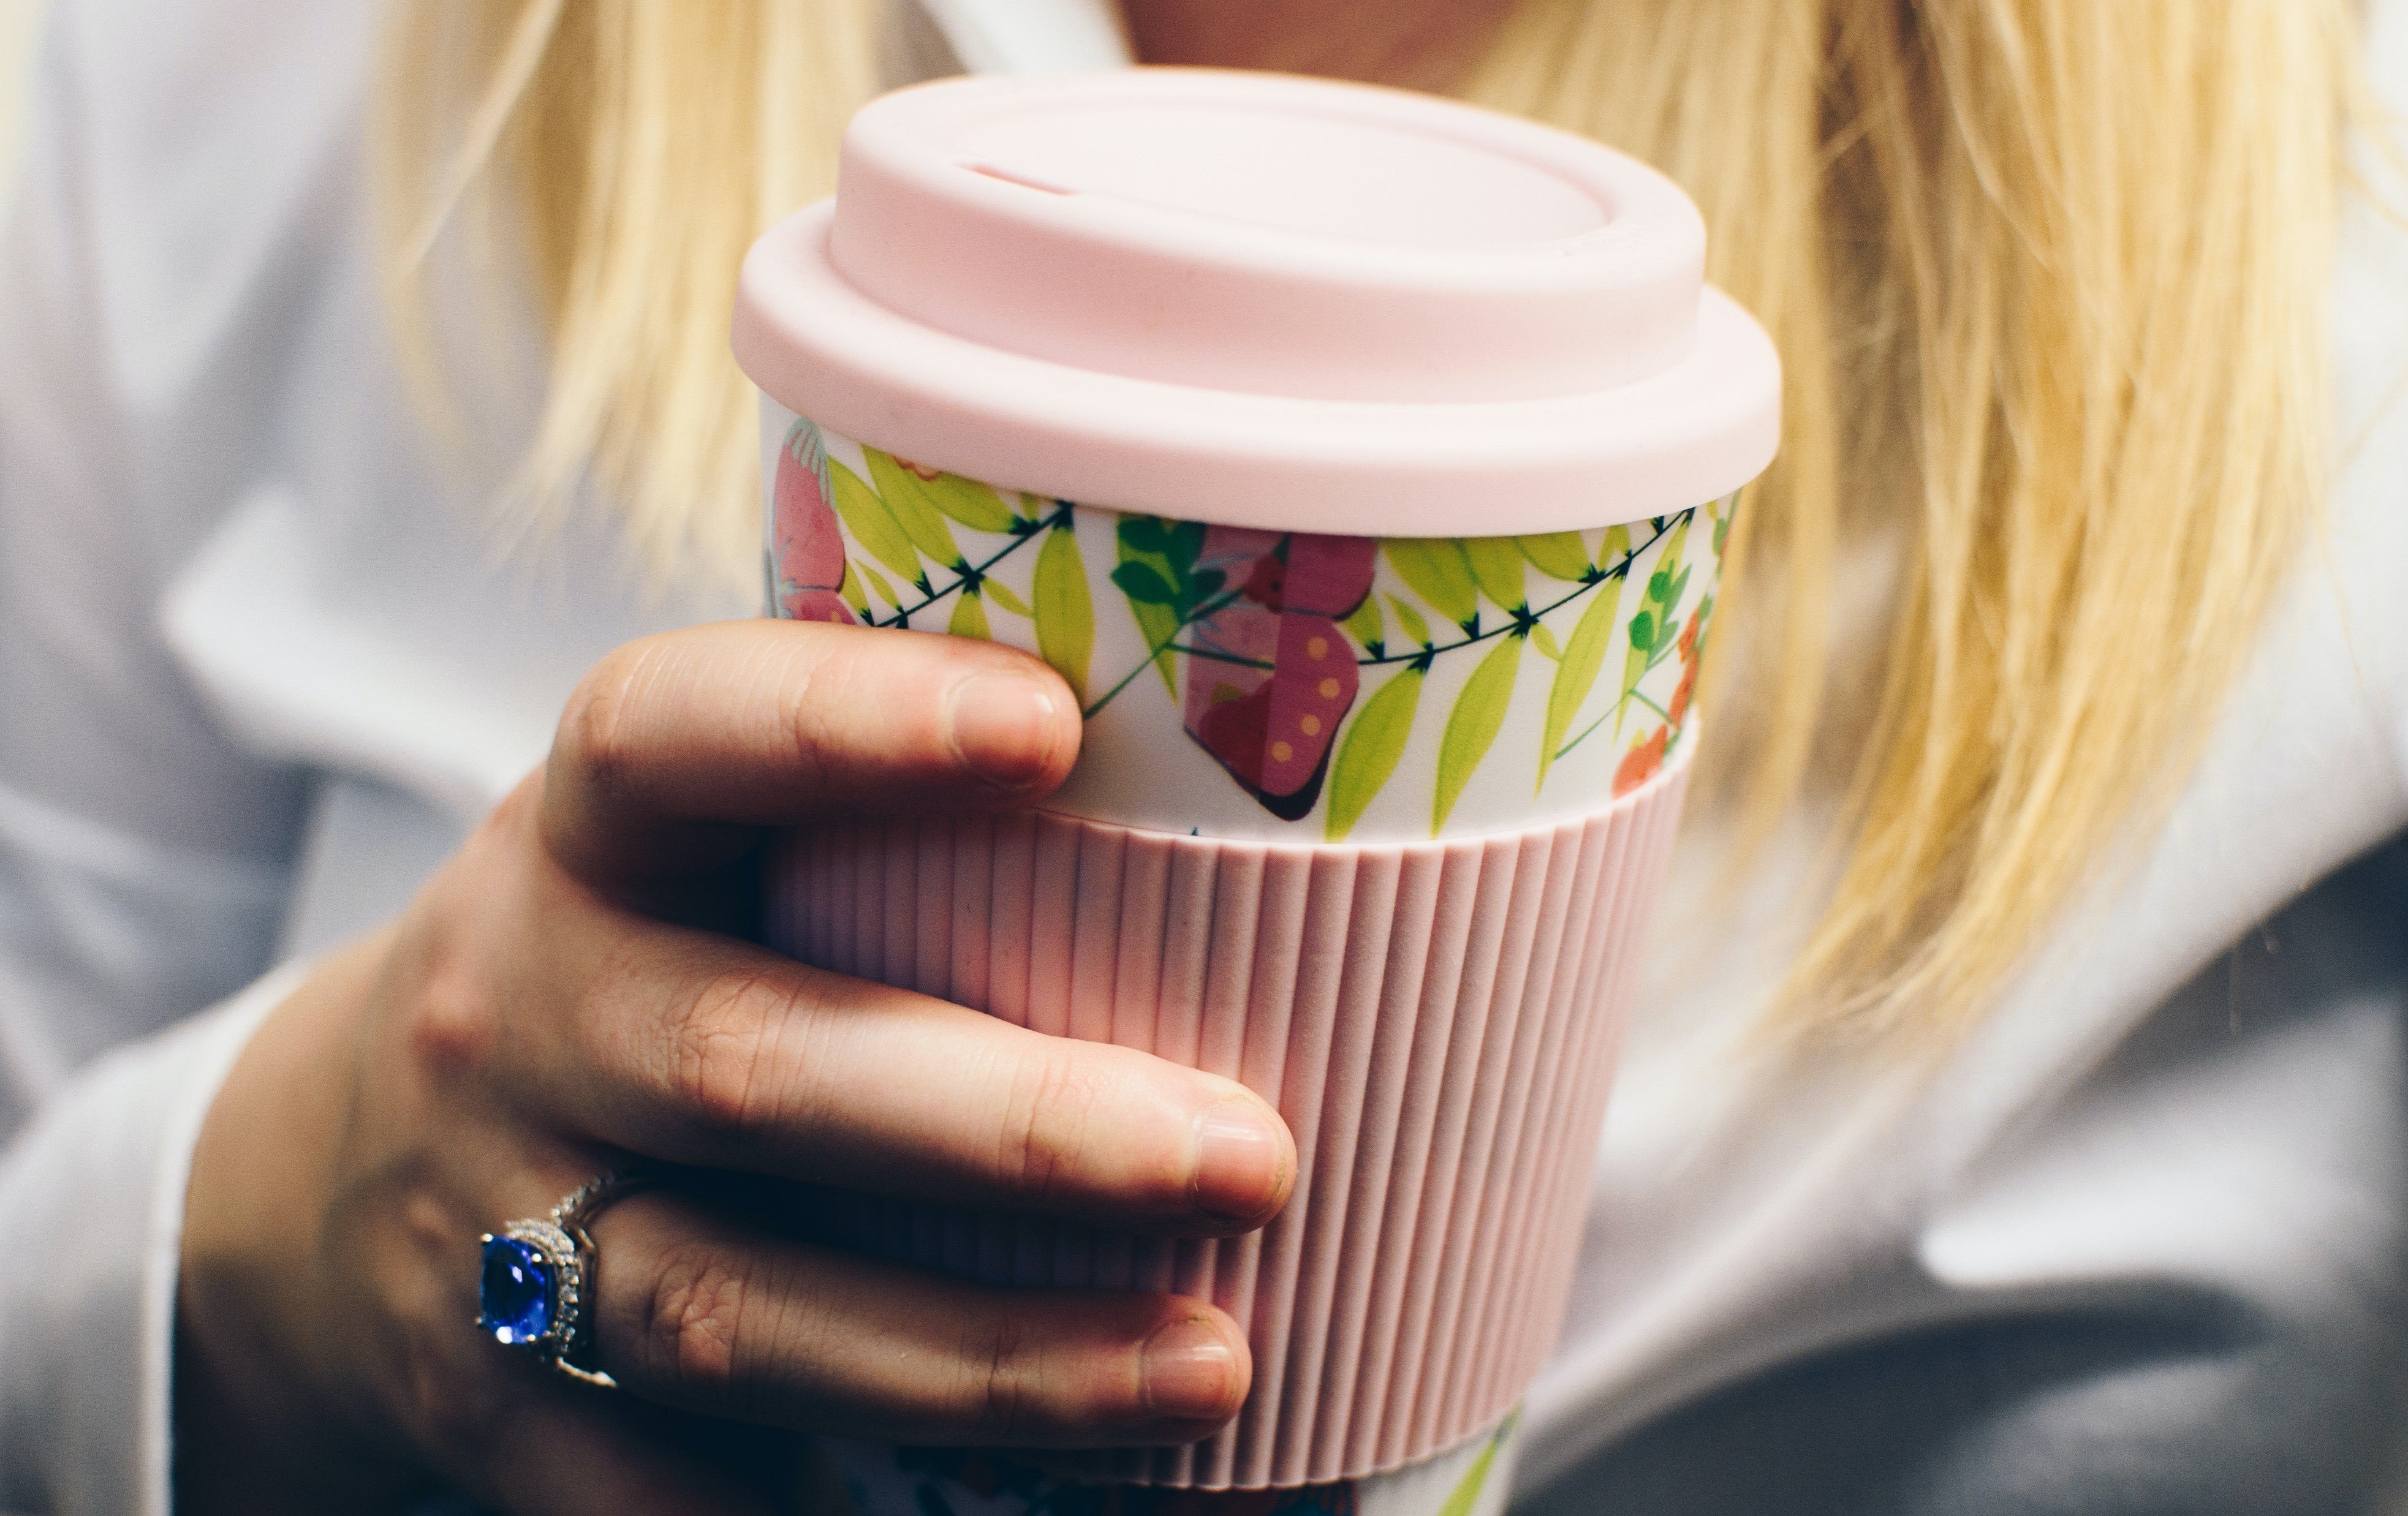 I Am Not a Paper Cup: A ceramic travel mug that looks disposable